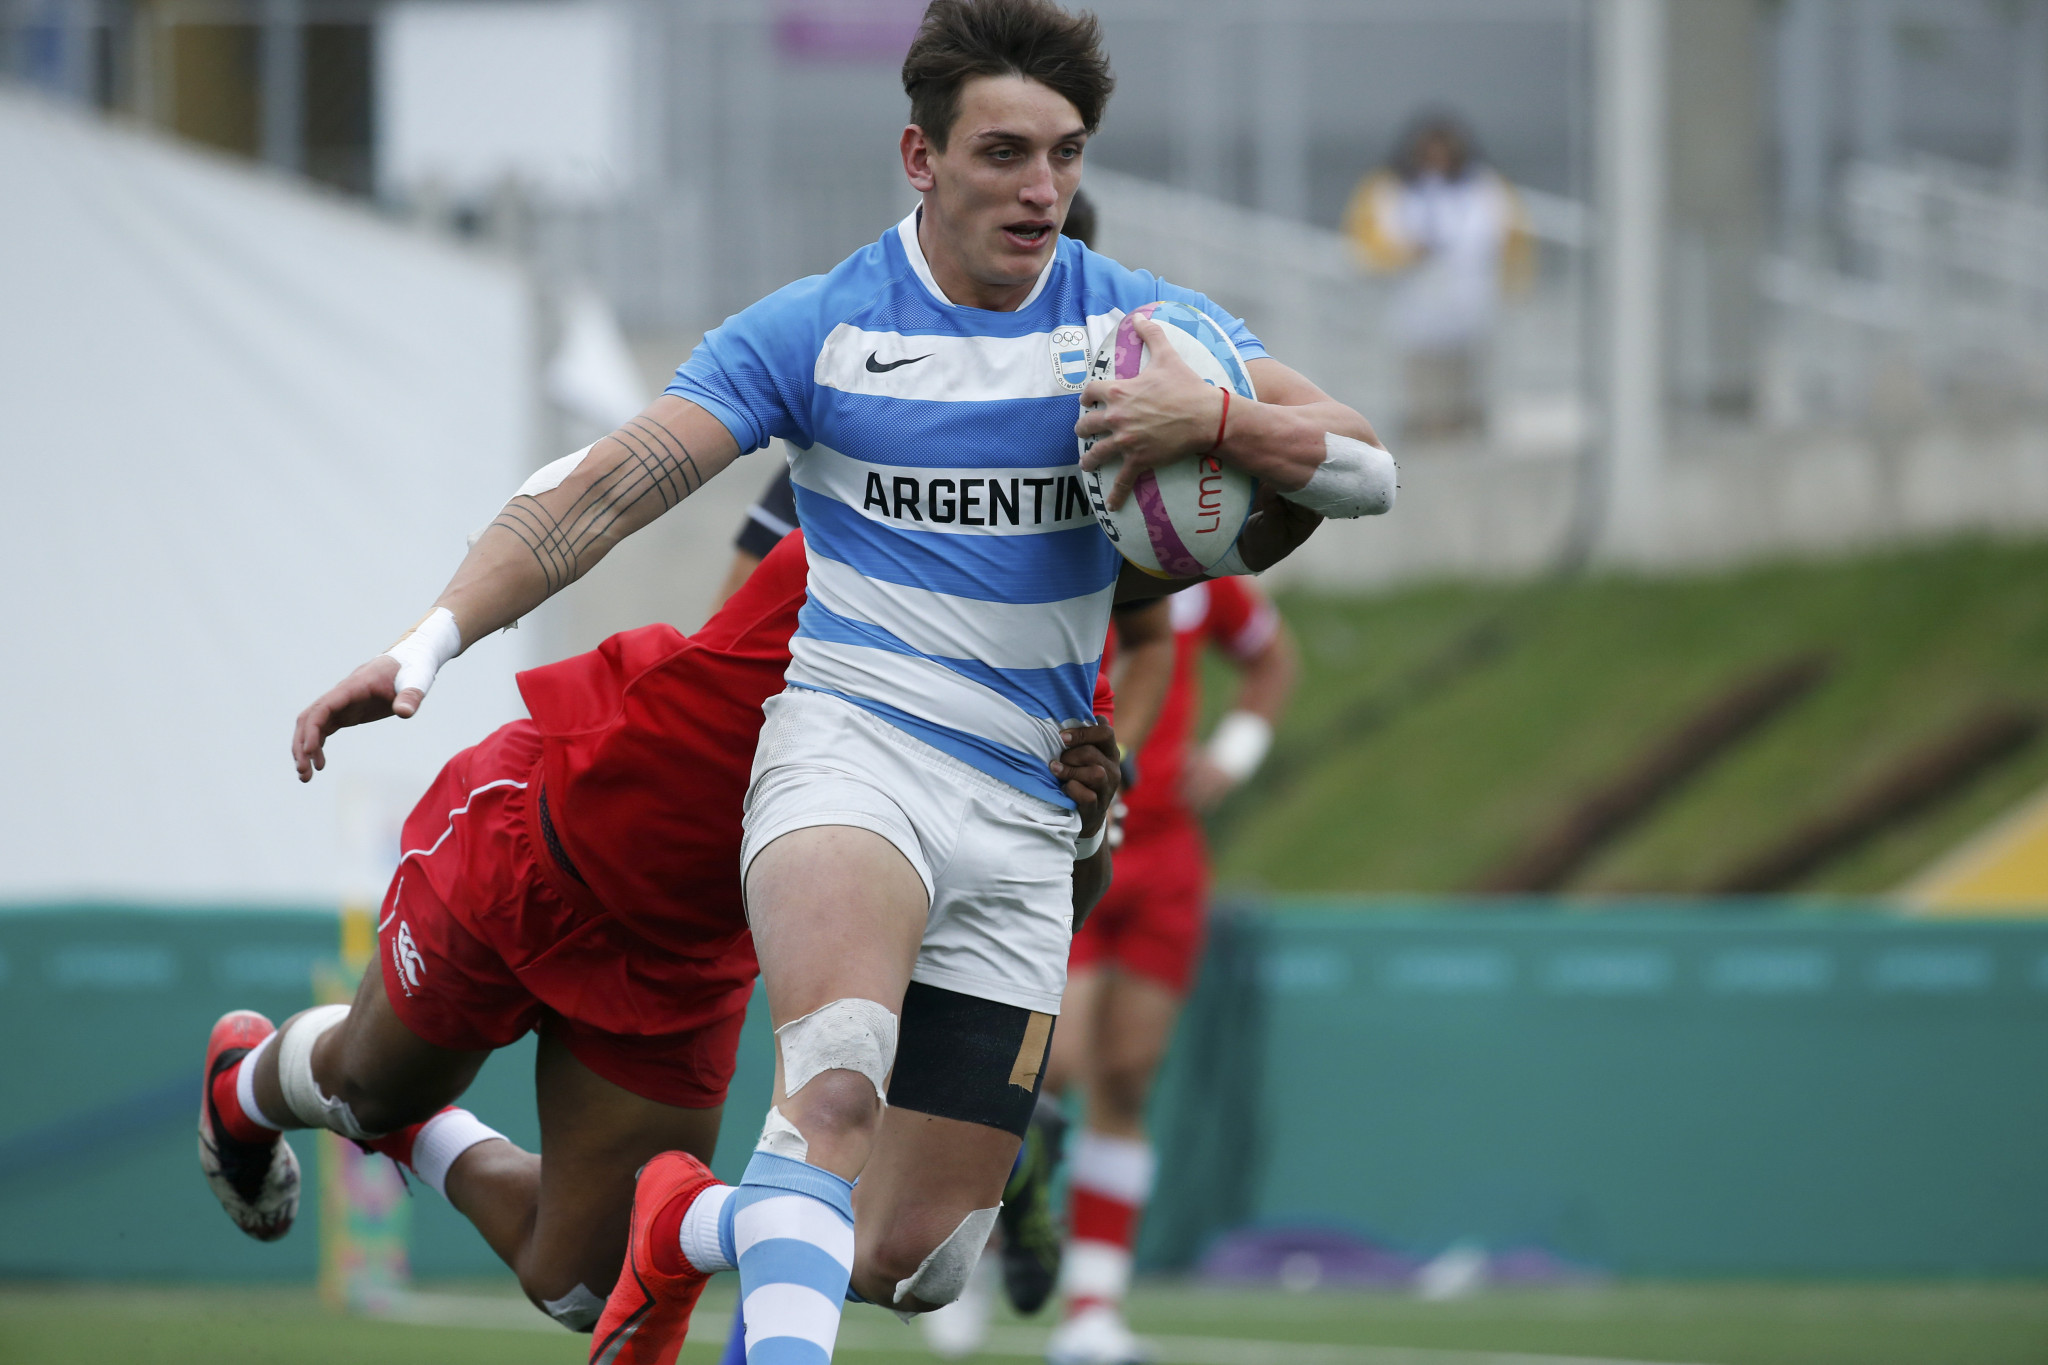 Argentina upset defending champions Canada to win the men's rugby sevens gold medal ©Lima 2019